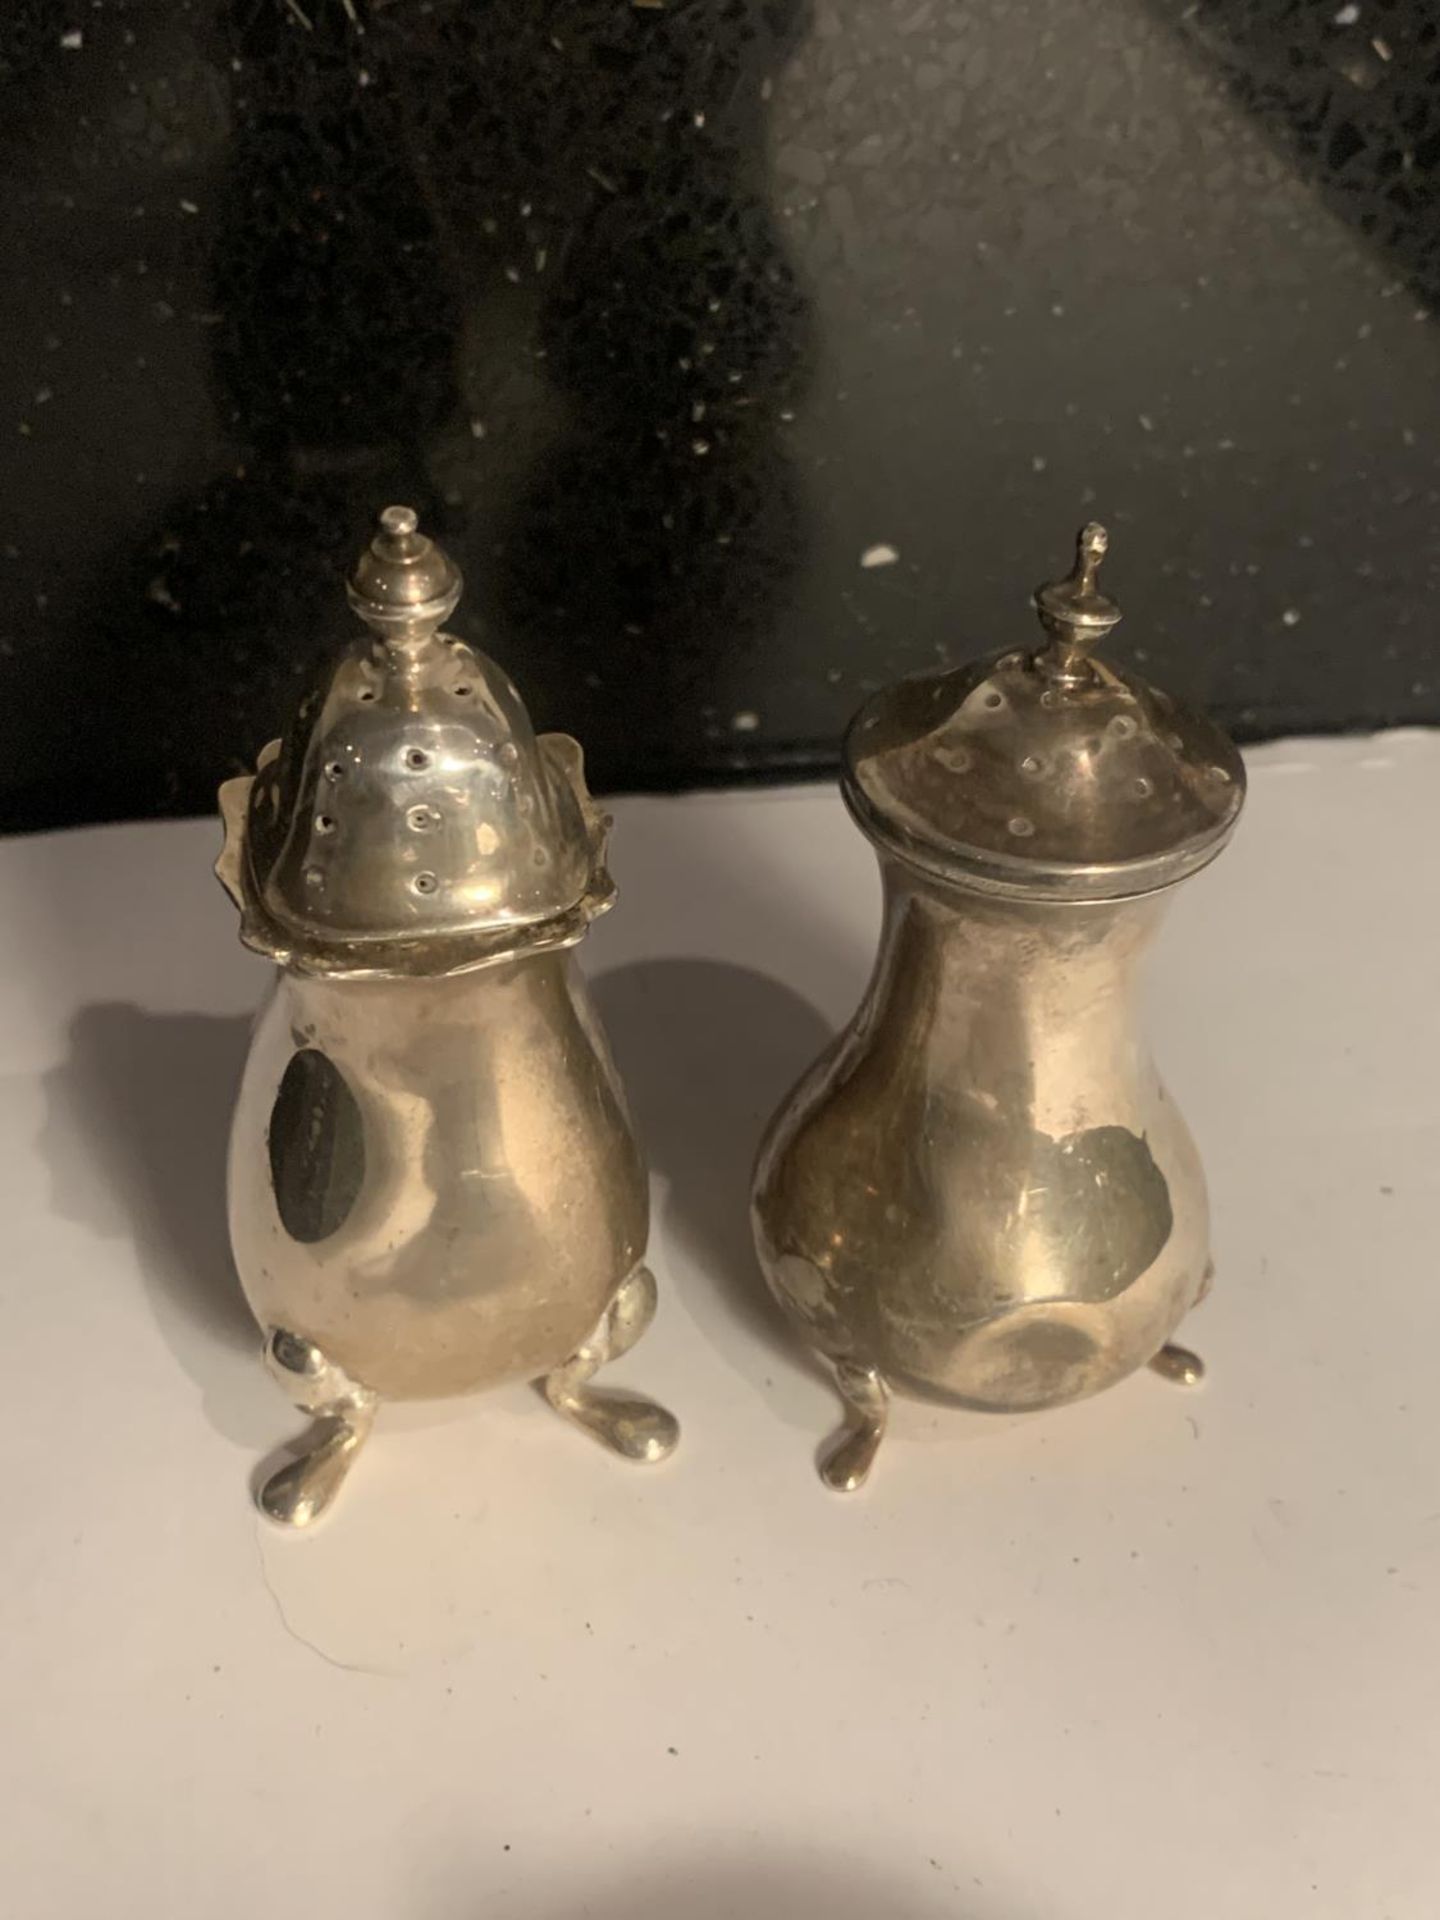 A HALLMARKED BIRMINGHAM SILVER CRUET SET WITH TWO SPOONS GROSS WEIGHT 133.7 GRAMS - Image 2 of 6